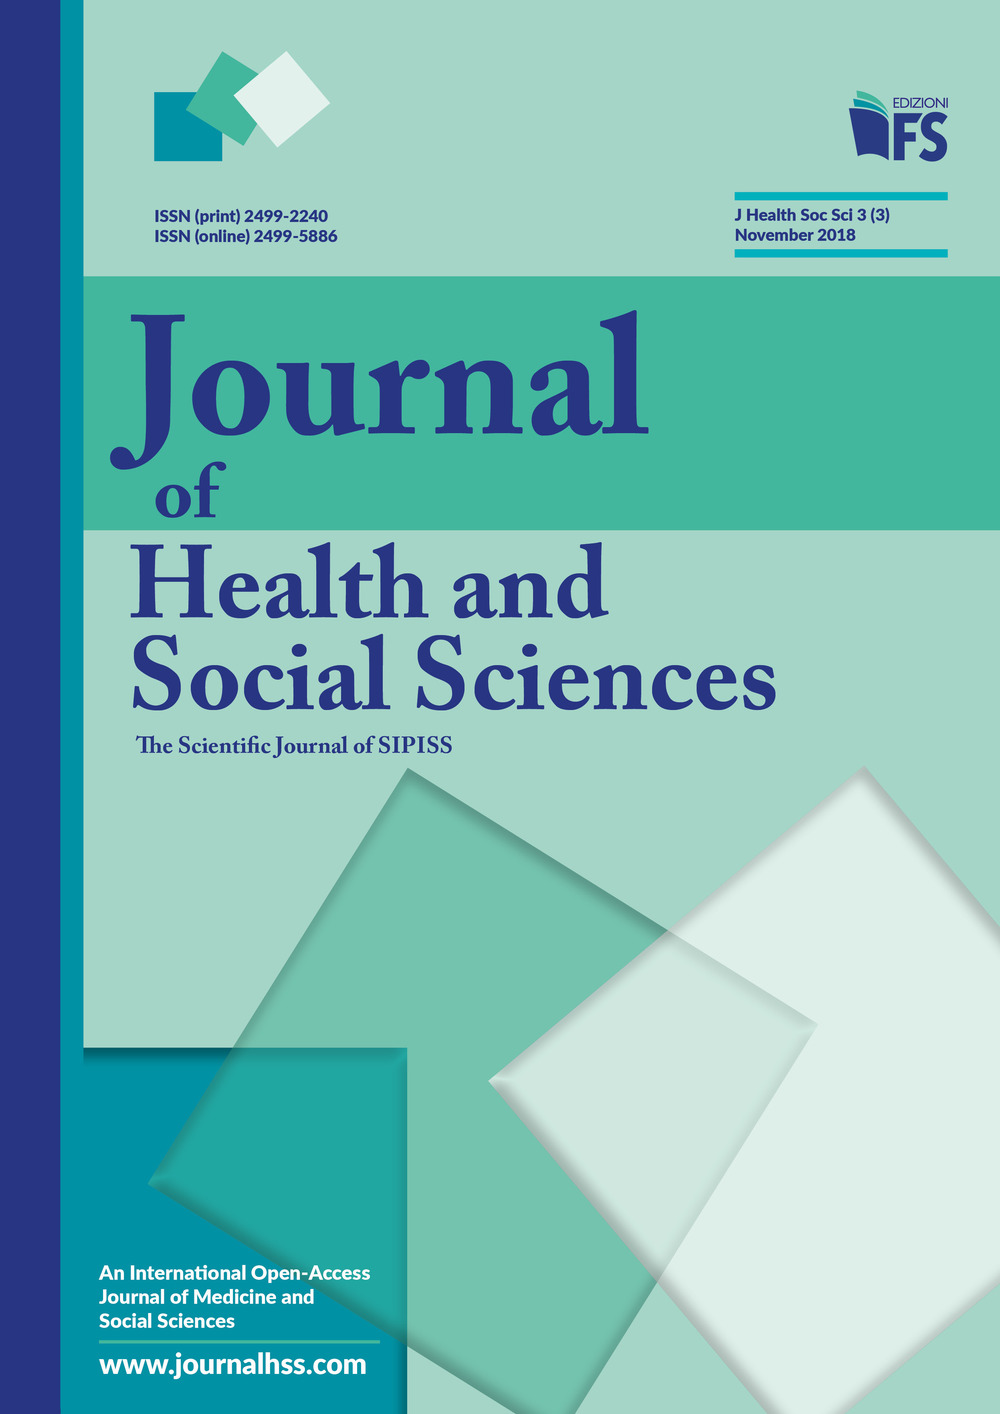 Journal of health and social sciences (2018). Vol. 3: November